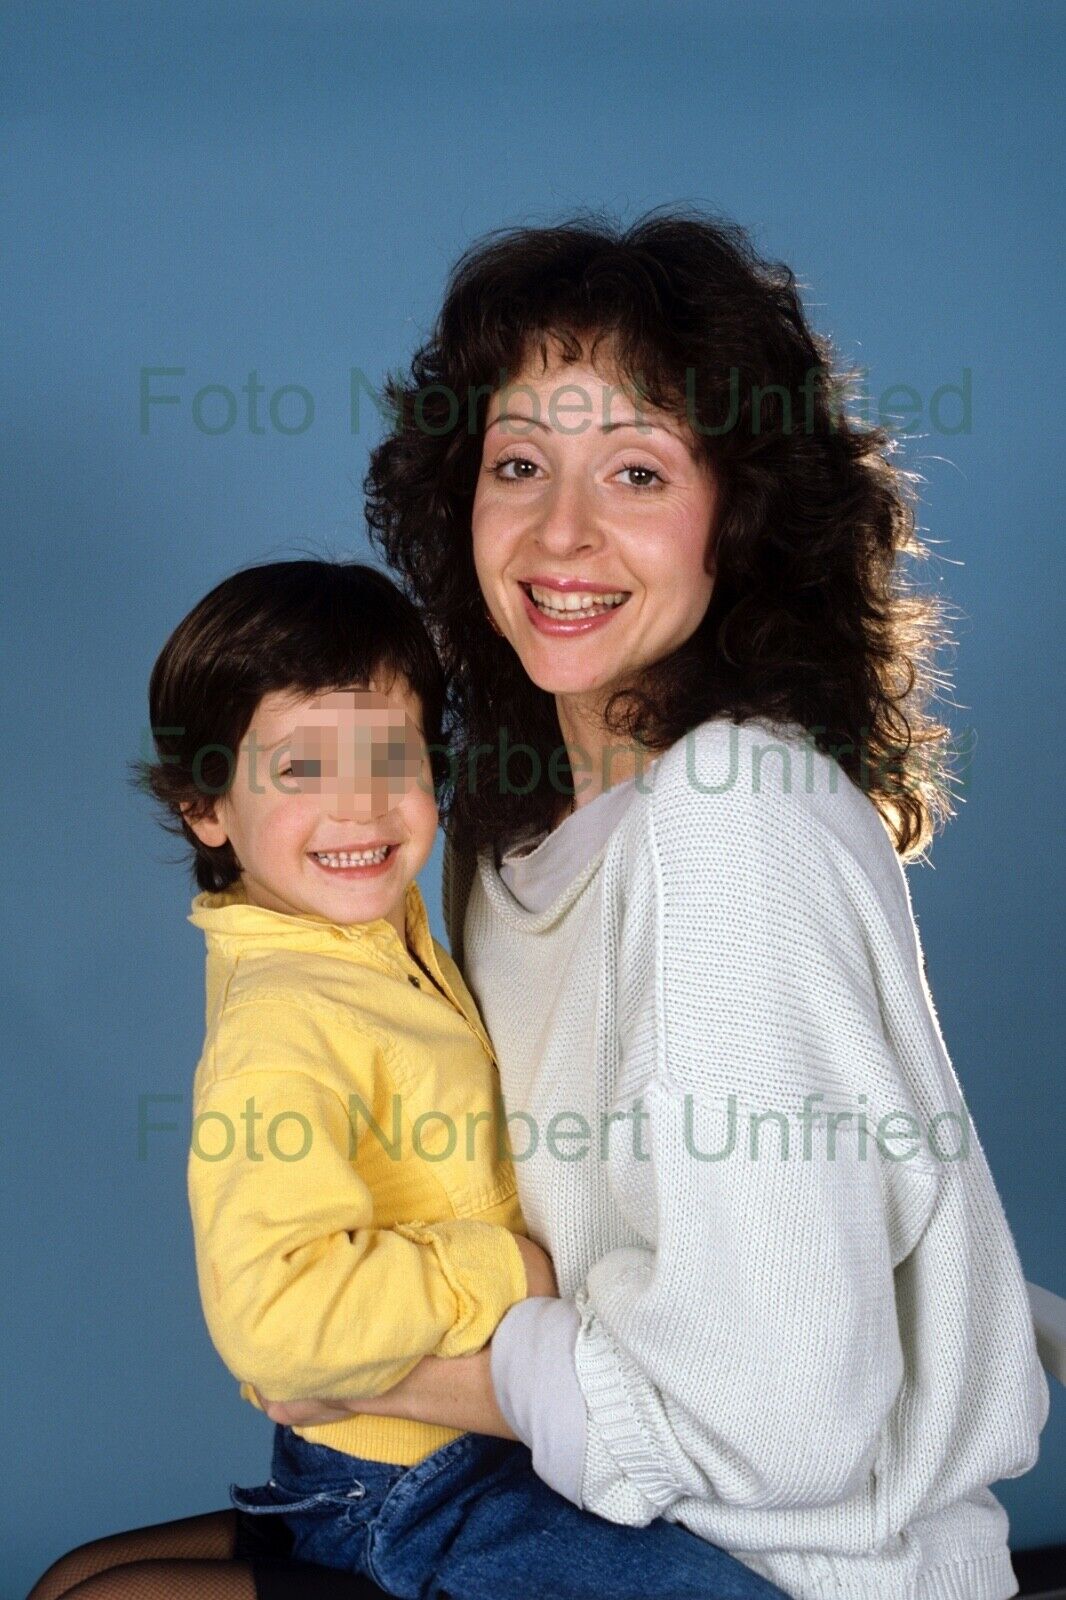 Vicky Leandros With Child - Photo Poster painting 20 X 30 CM Without Autograph (Nr 2-323